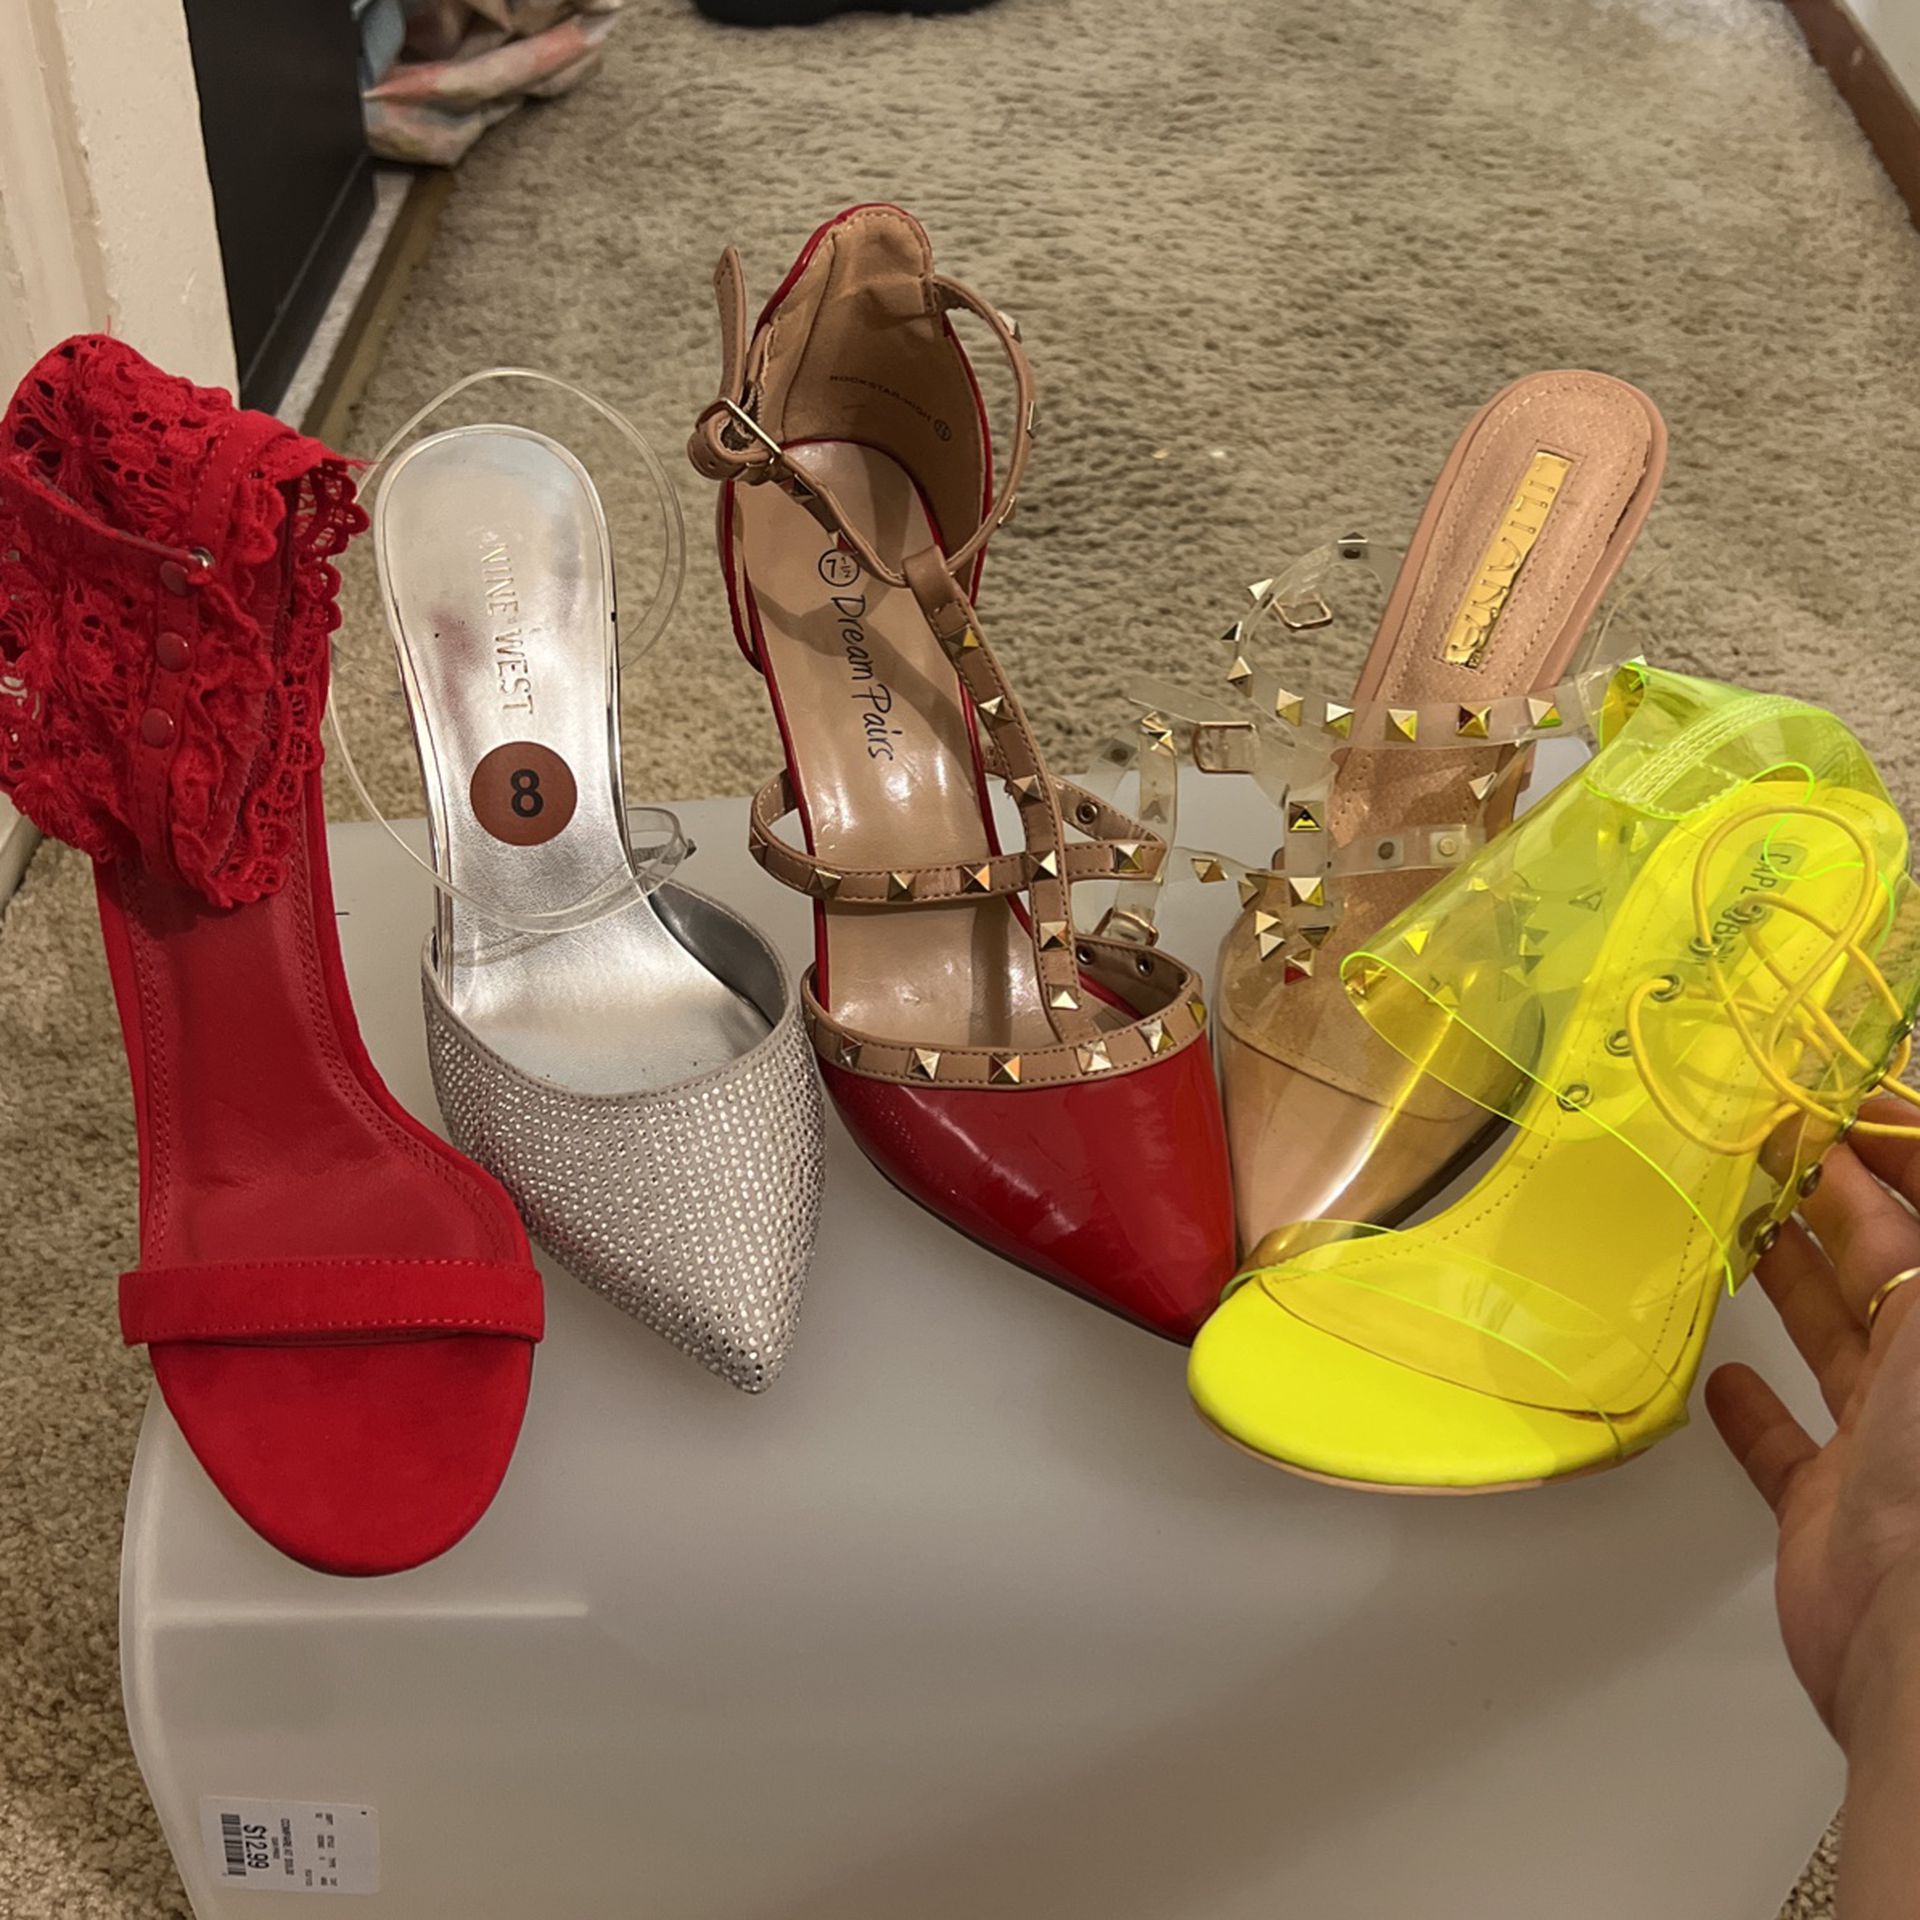 5 Pair Of Heels $7 For All